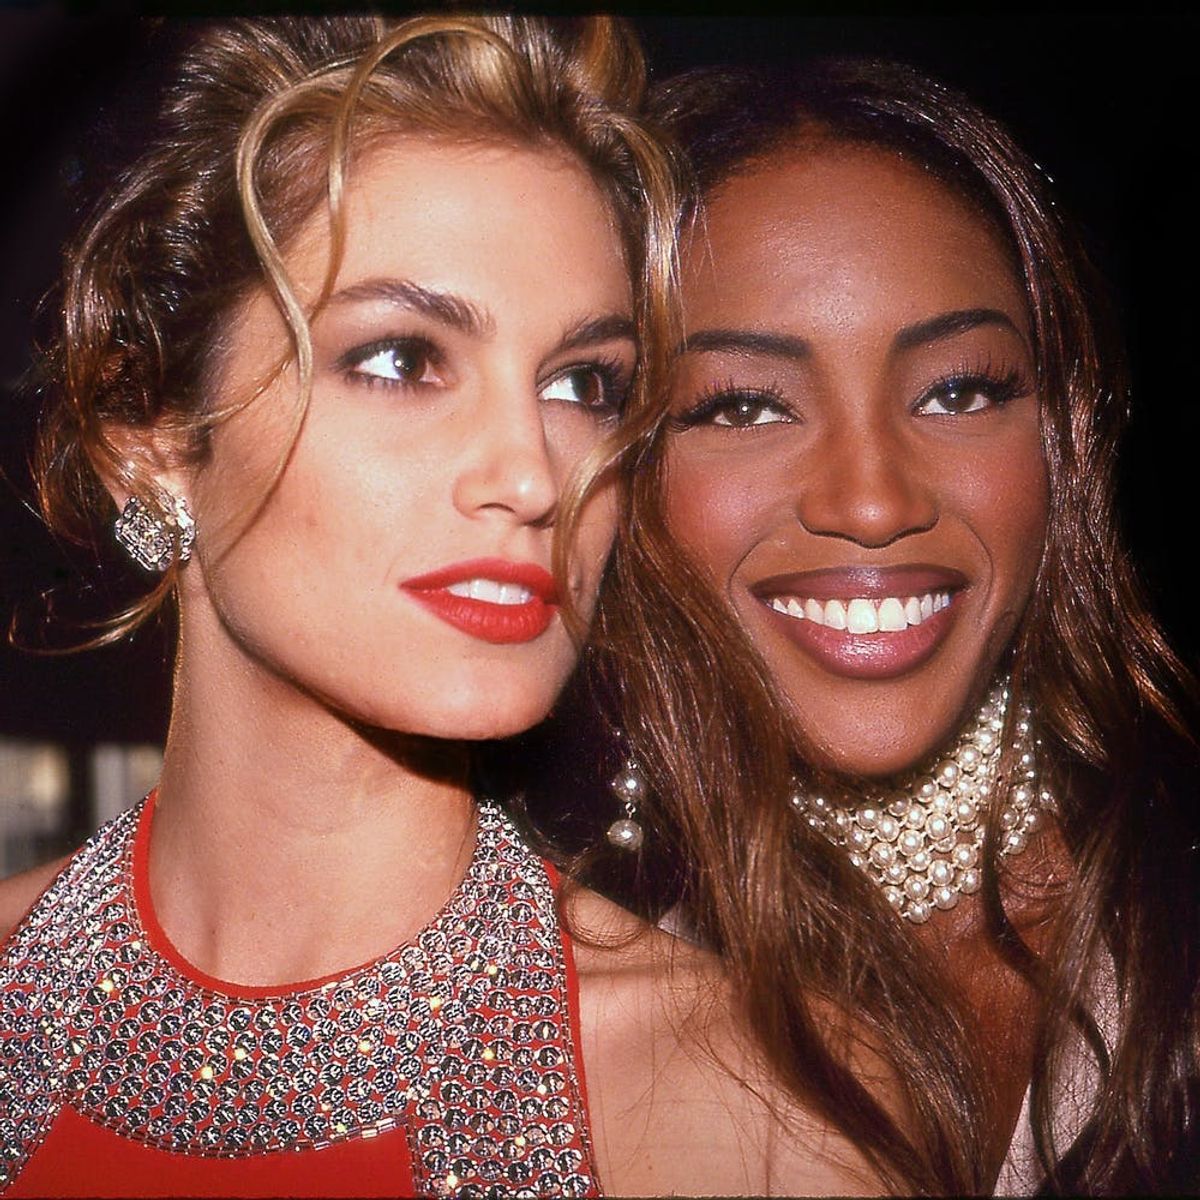 This Epic Runway Reunion of ’90s Supermodels Will Give You Chills